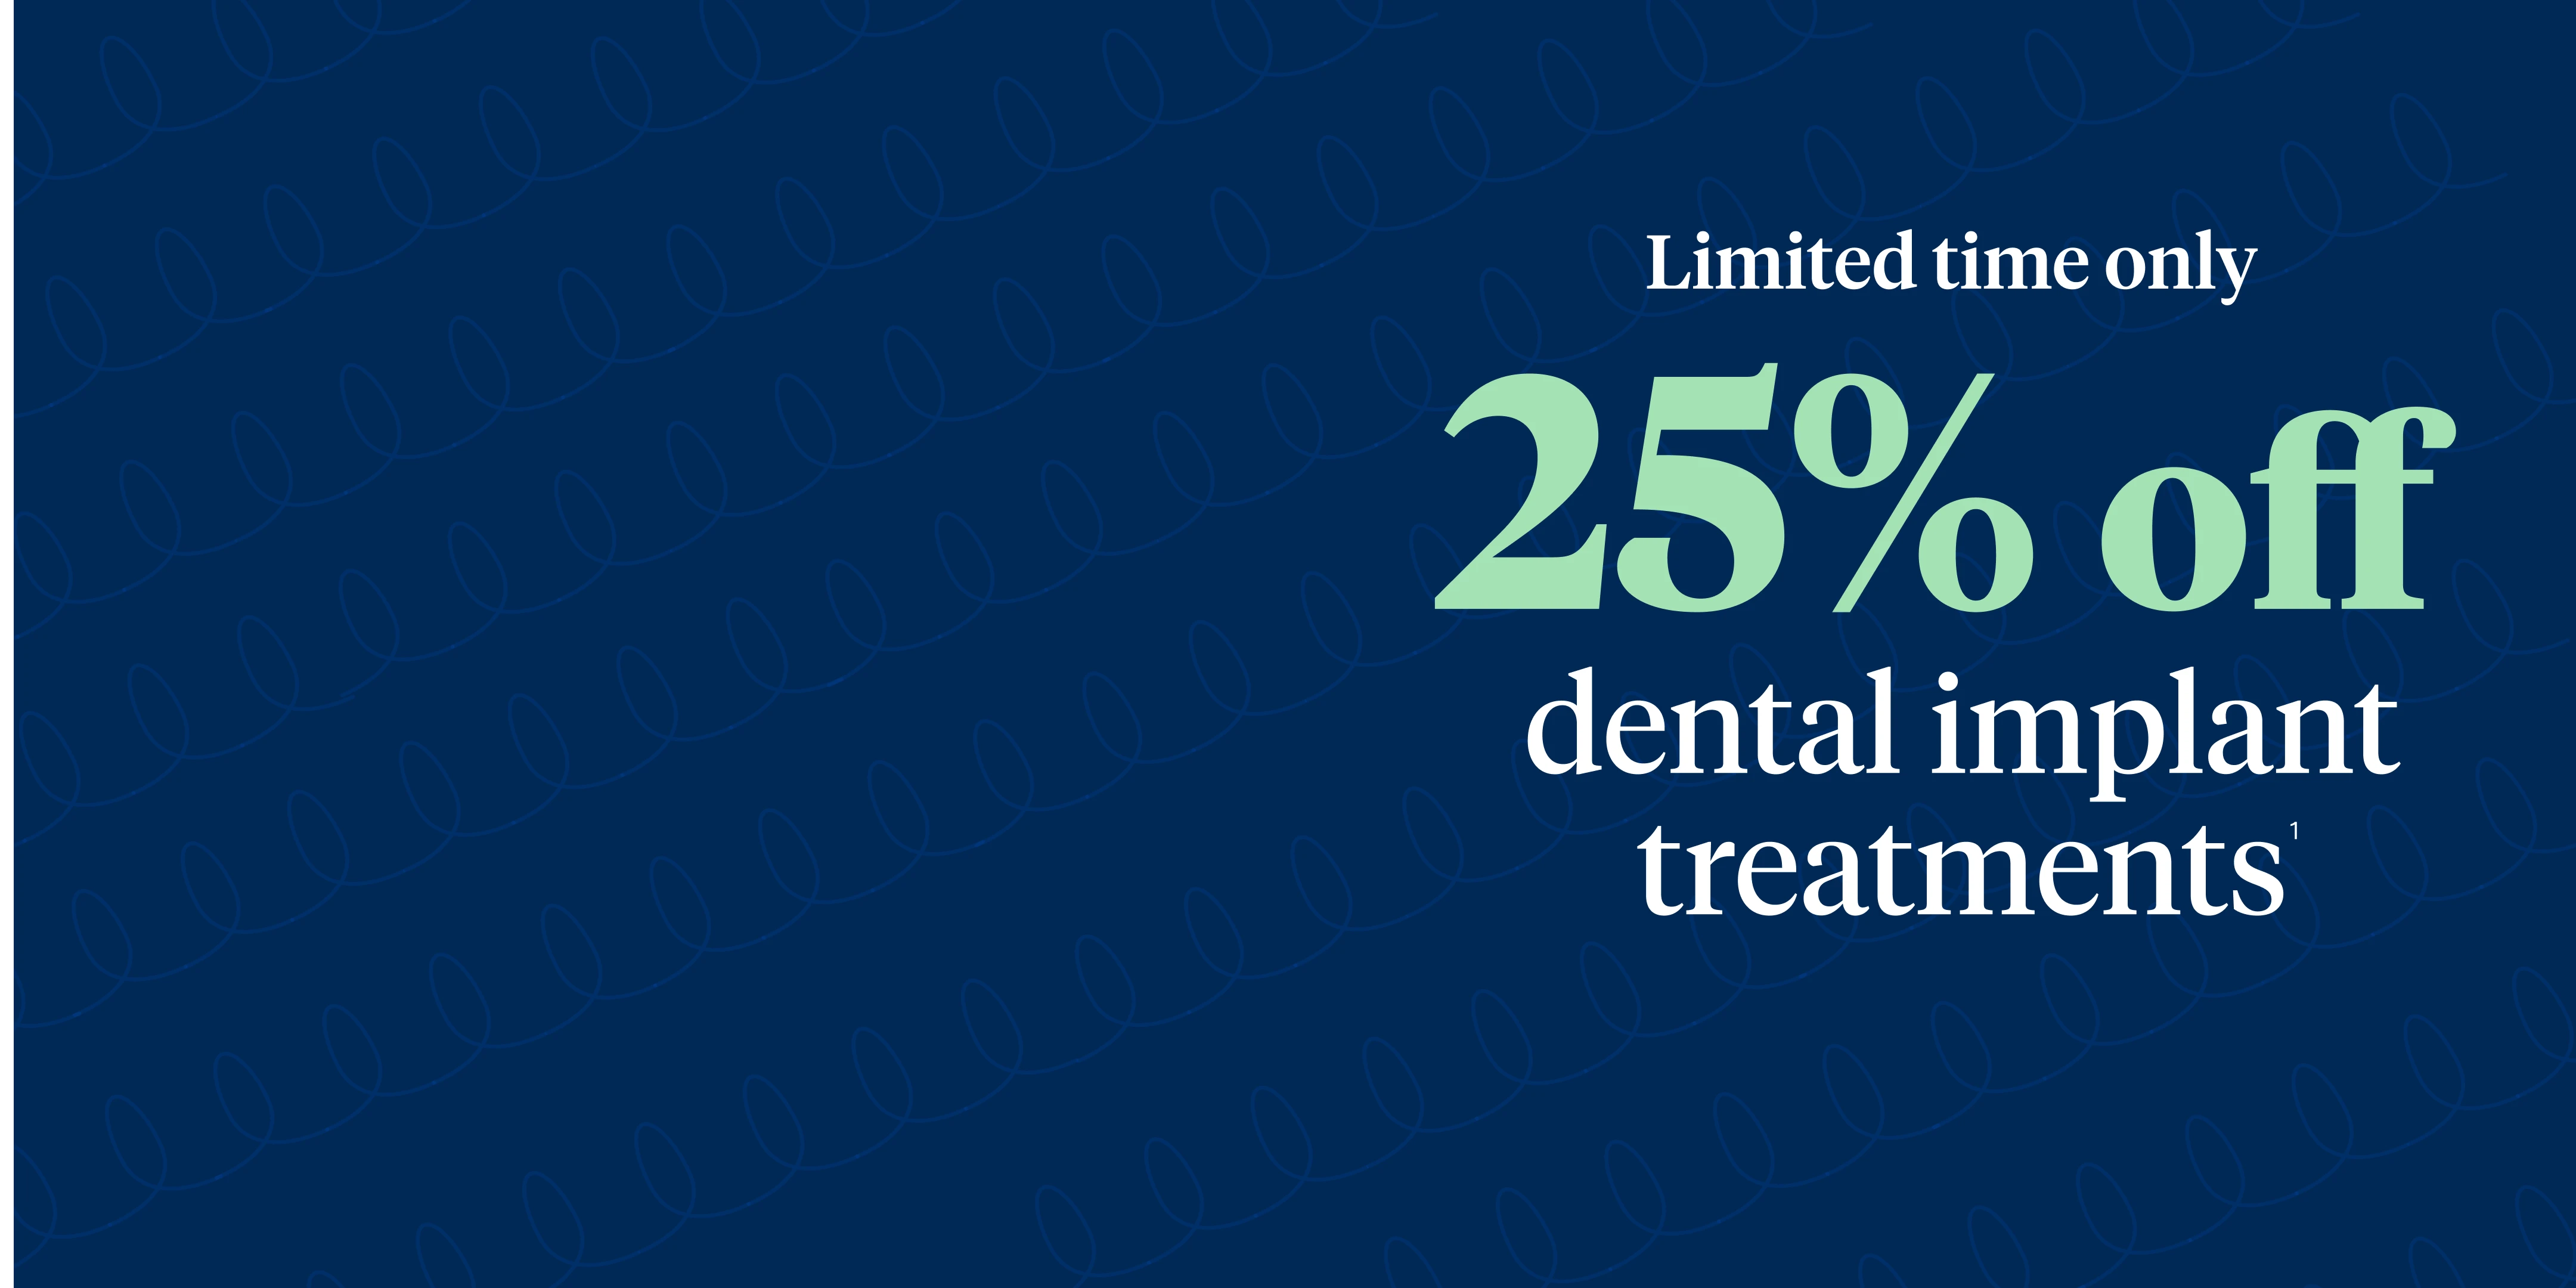 Limited time only. 25% off dental implant treatments. 